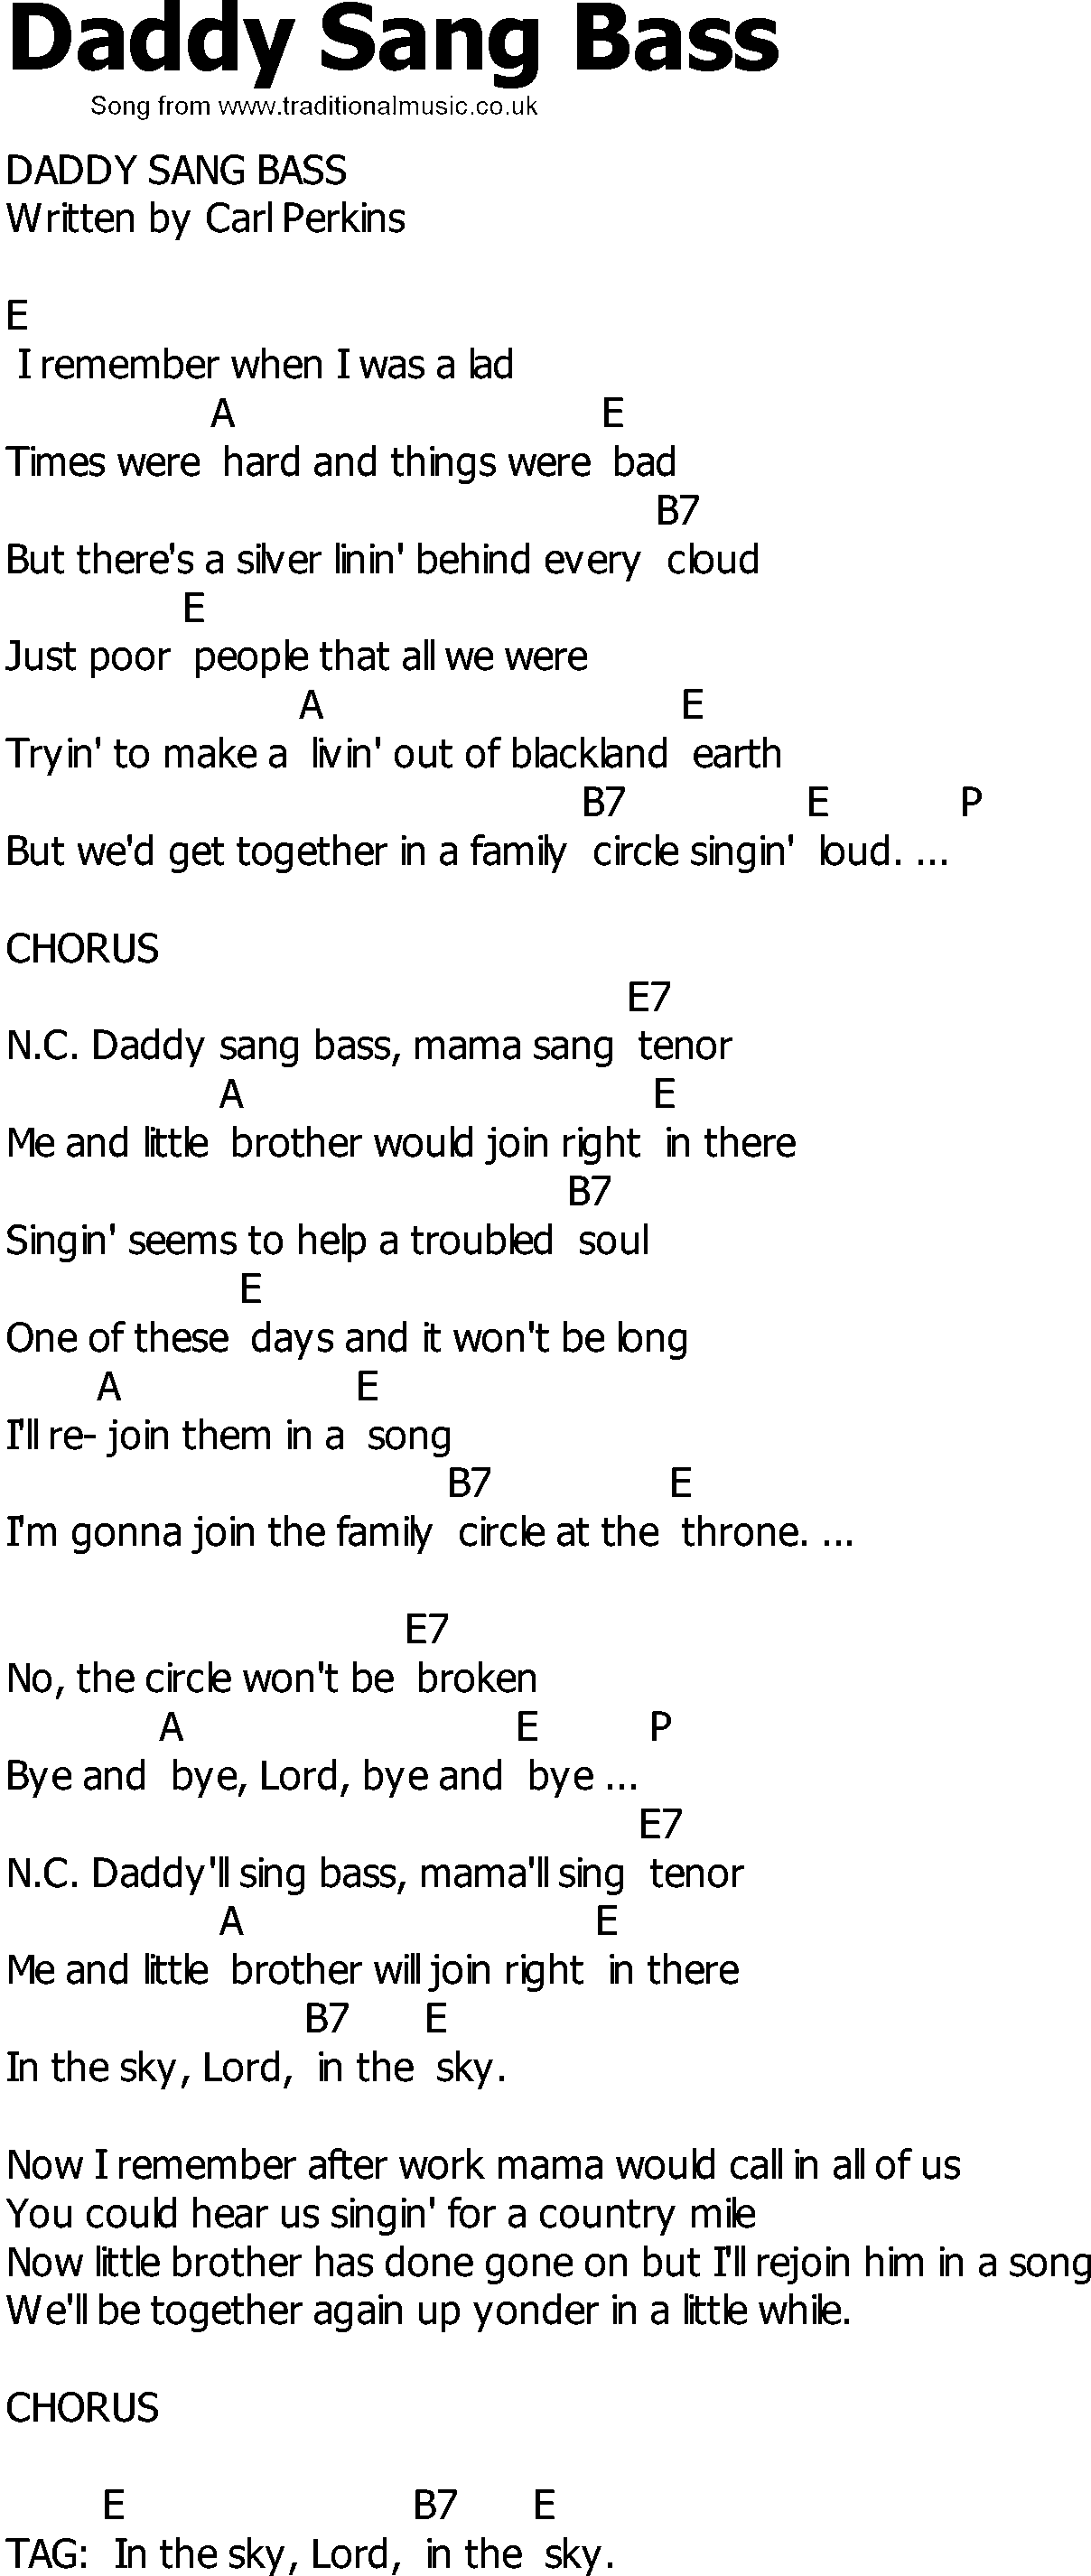 Old Country song lyrics with chords - Daddy Sang Bass